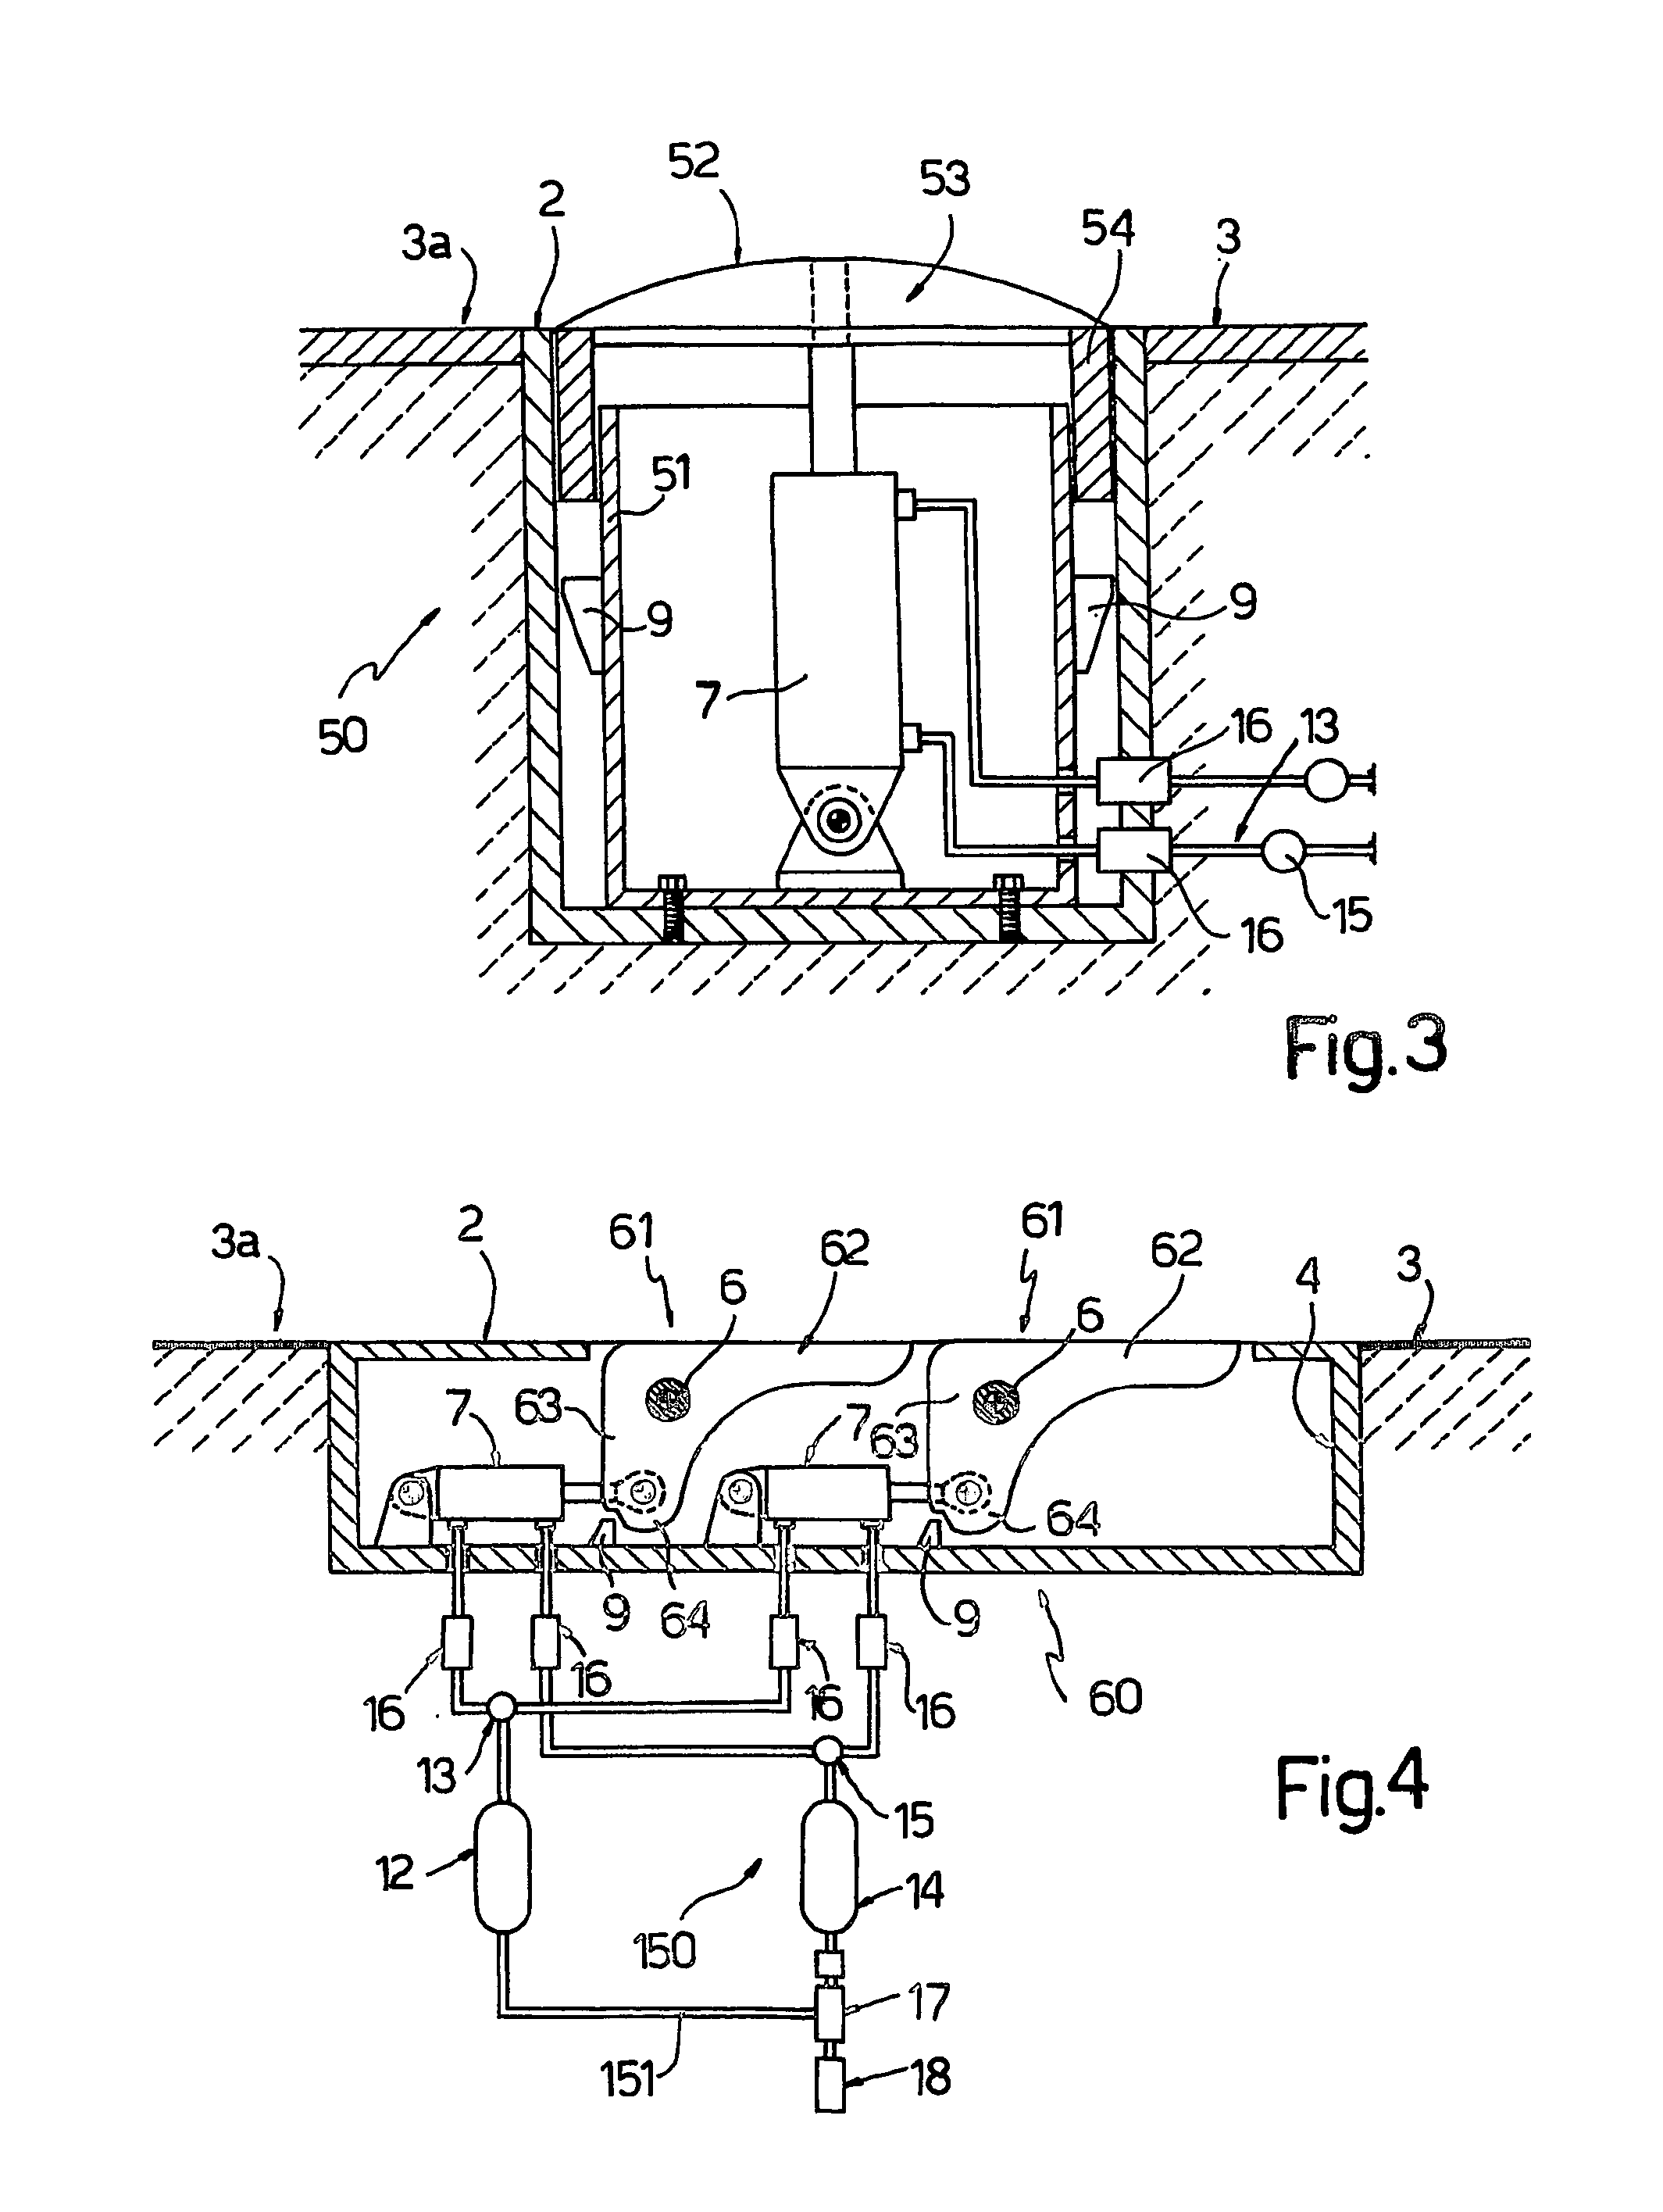 Fluid device for recovery of the kinetic energy of a vehicle